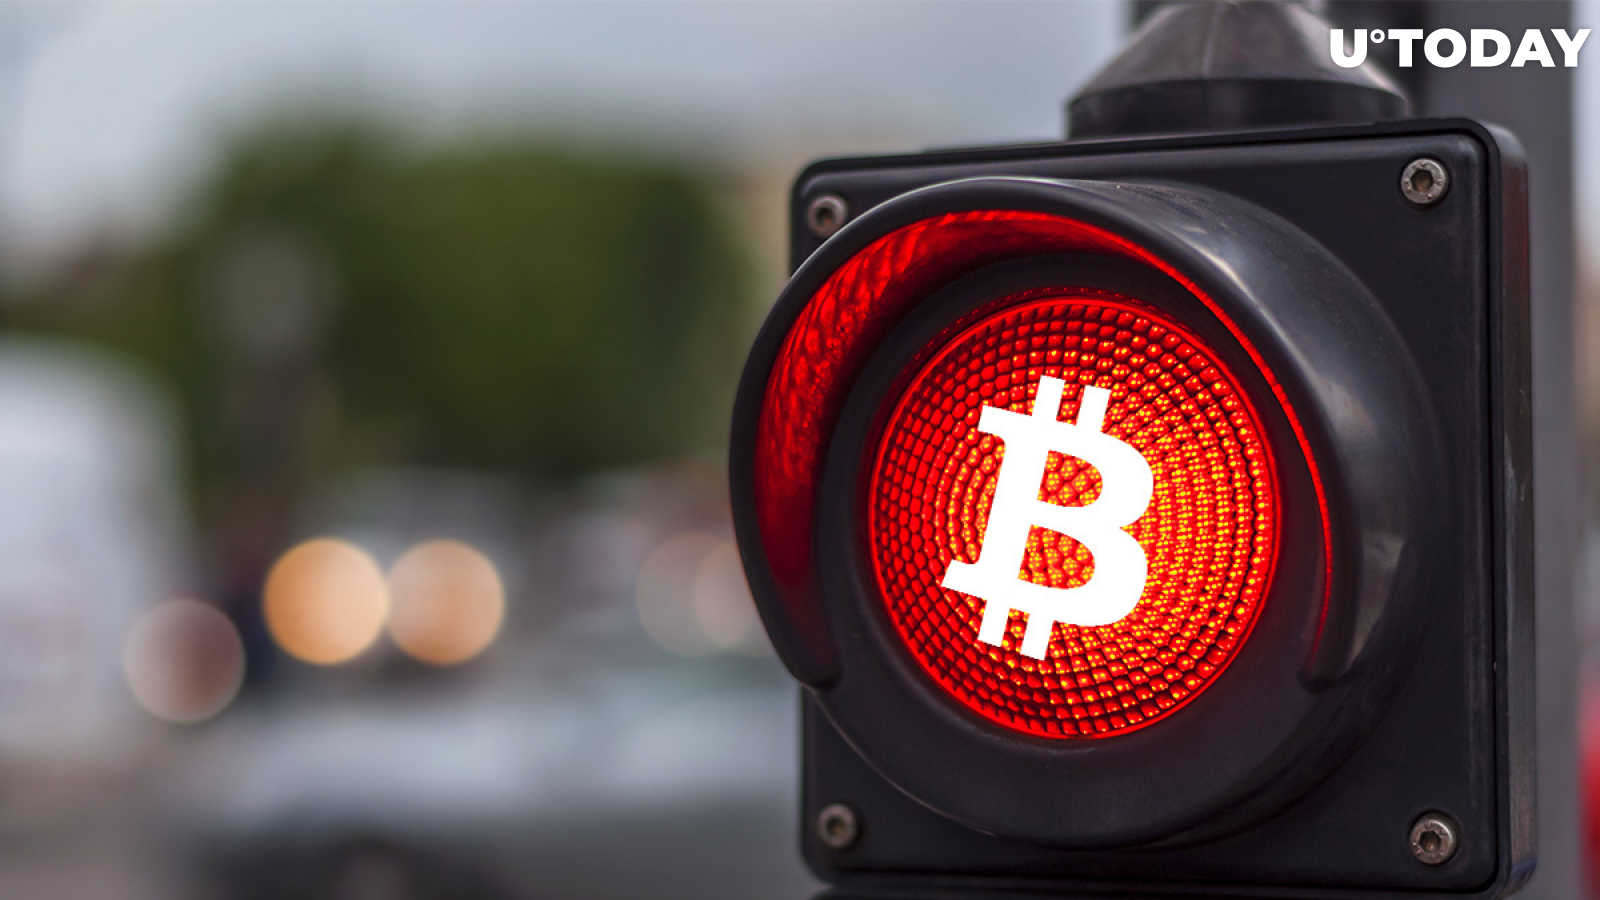 Bitcoin Funding Rate Is In Red As Community Expects Volatile Weekend